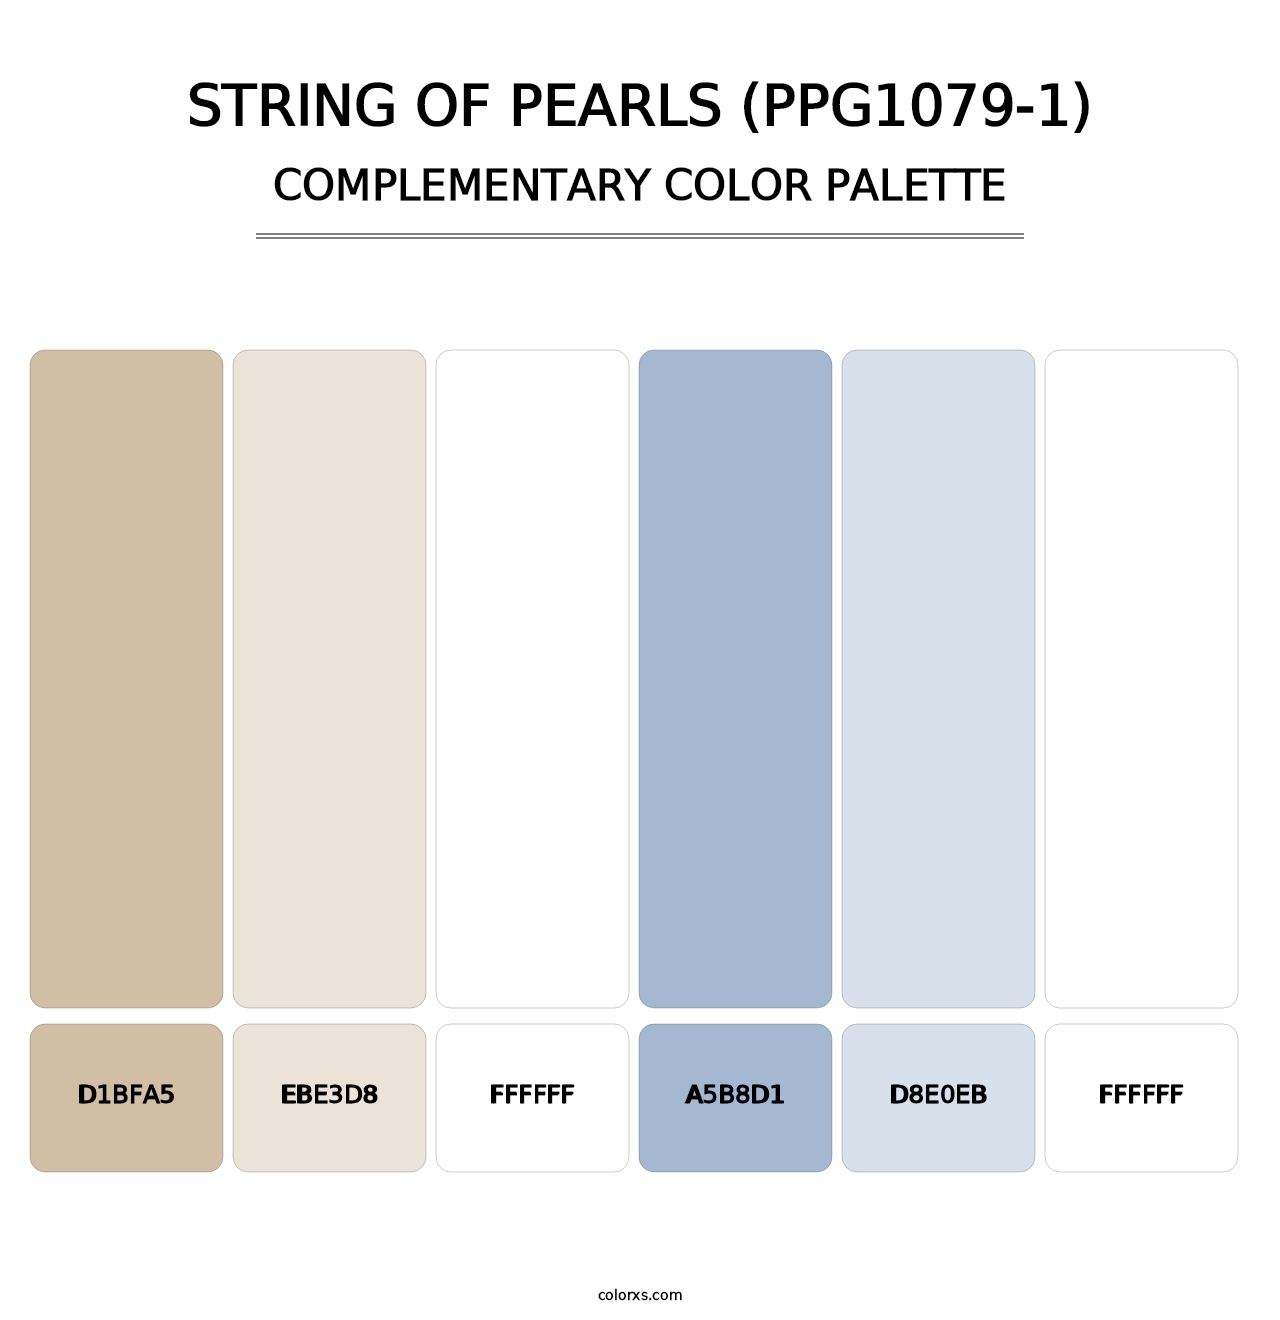 String Of Pearls (PPG1079-1) - Complementary Color Palette